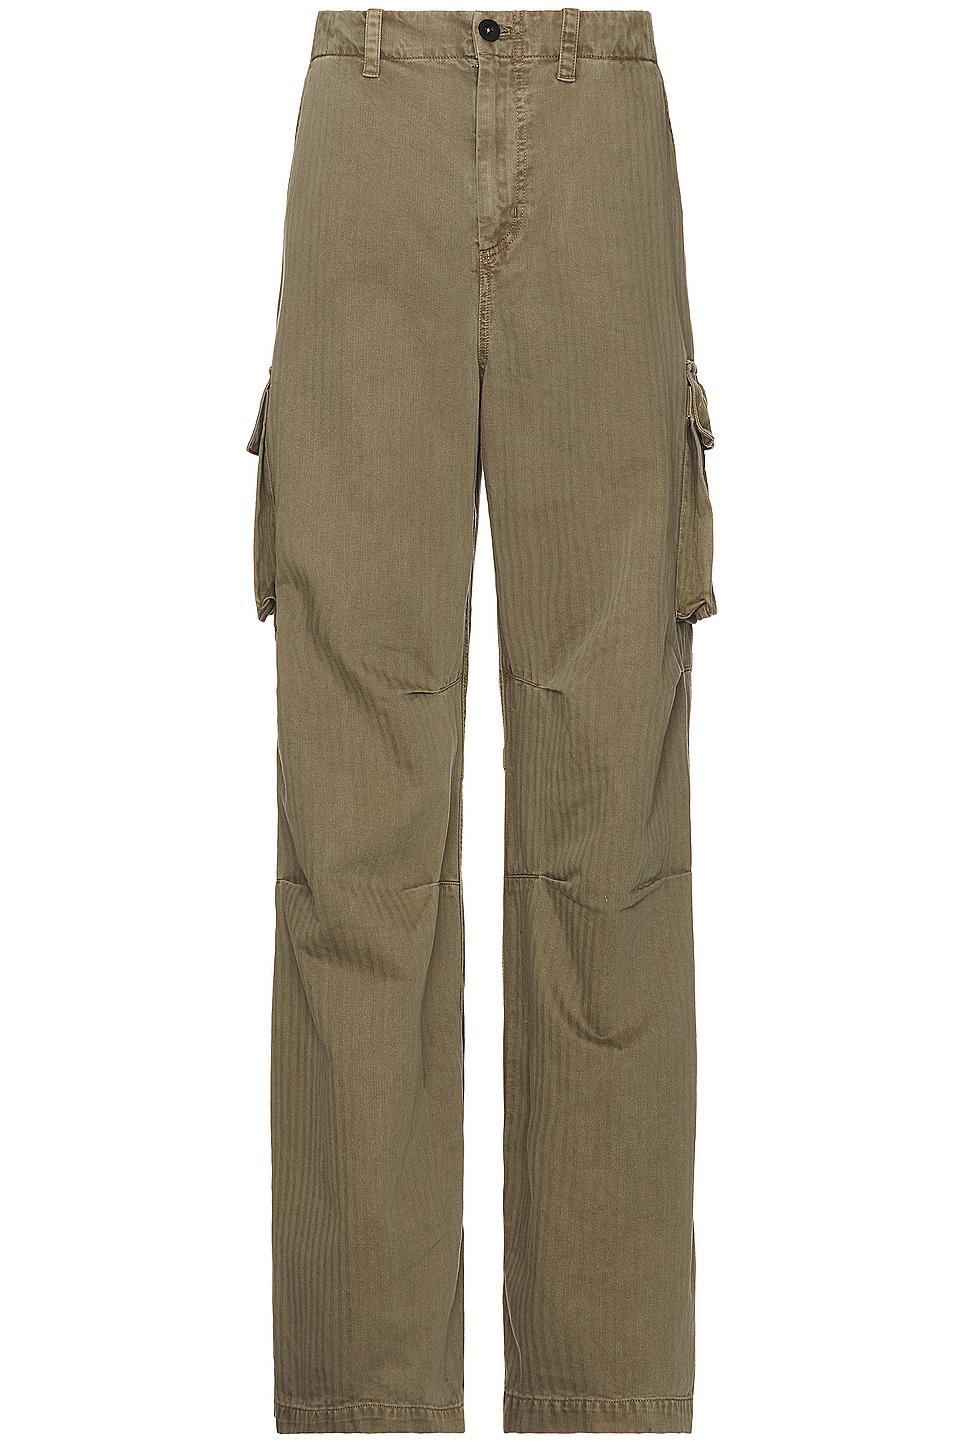 Image 1 of Our Legacy Mount Cargo Pant in Uniform Olive Herringbone